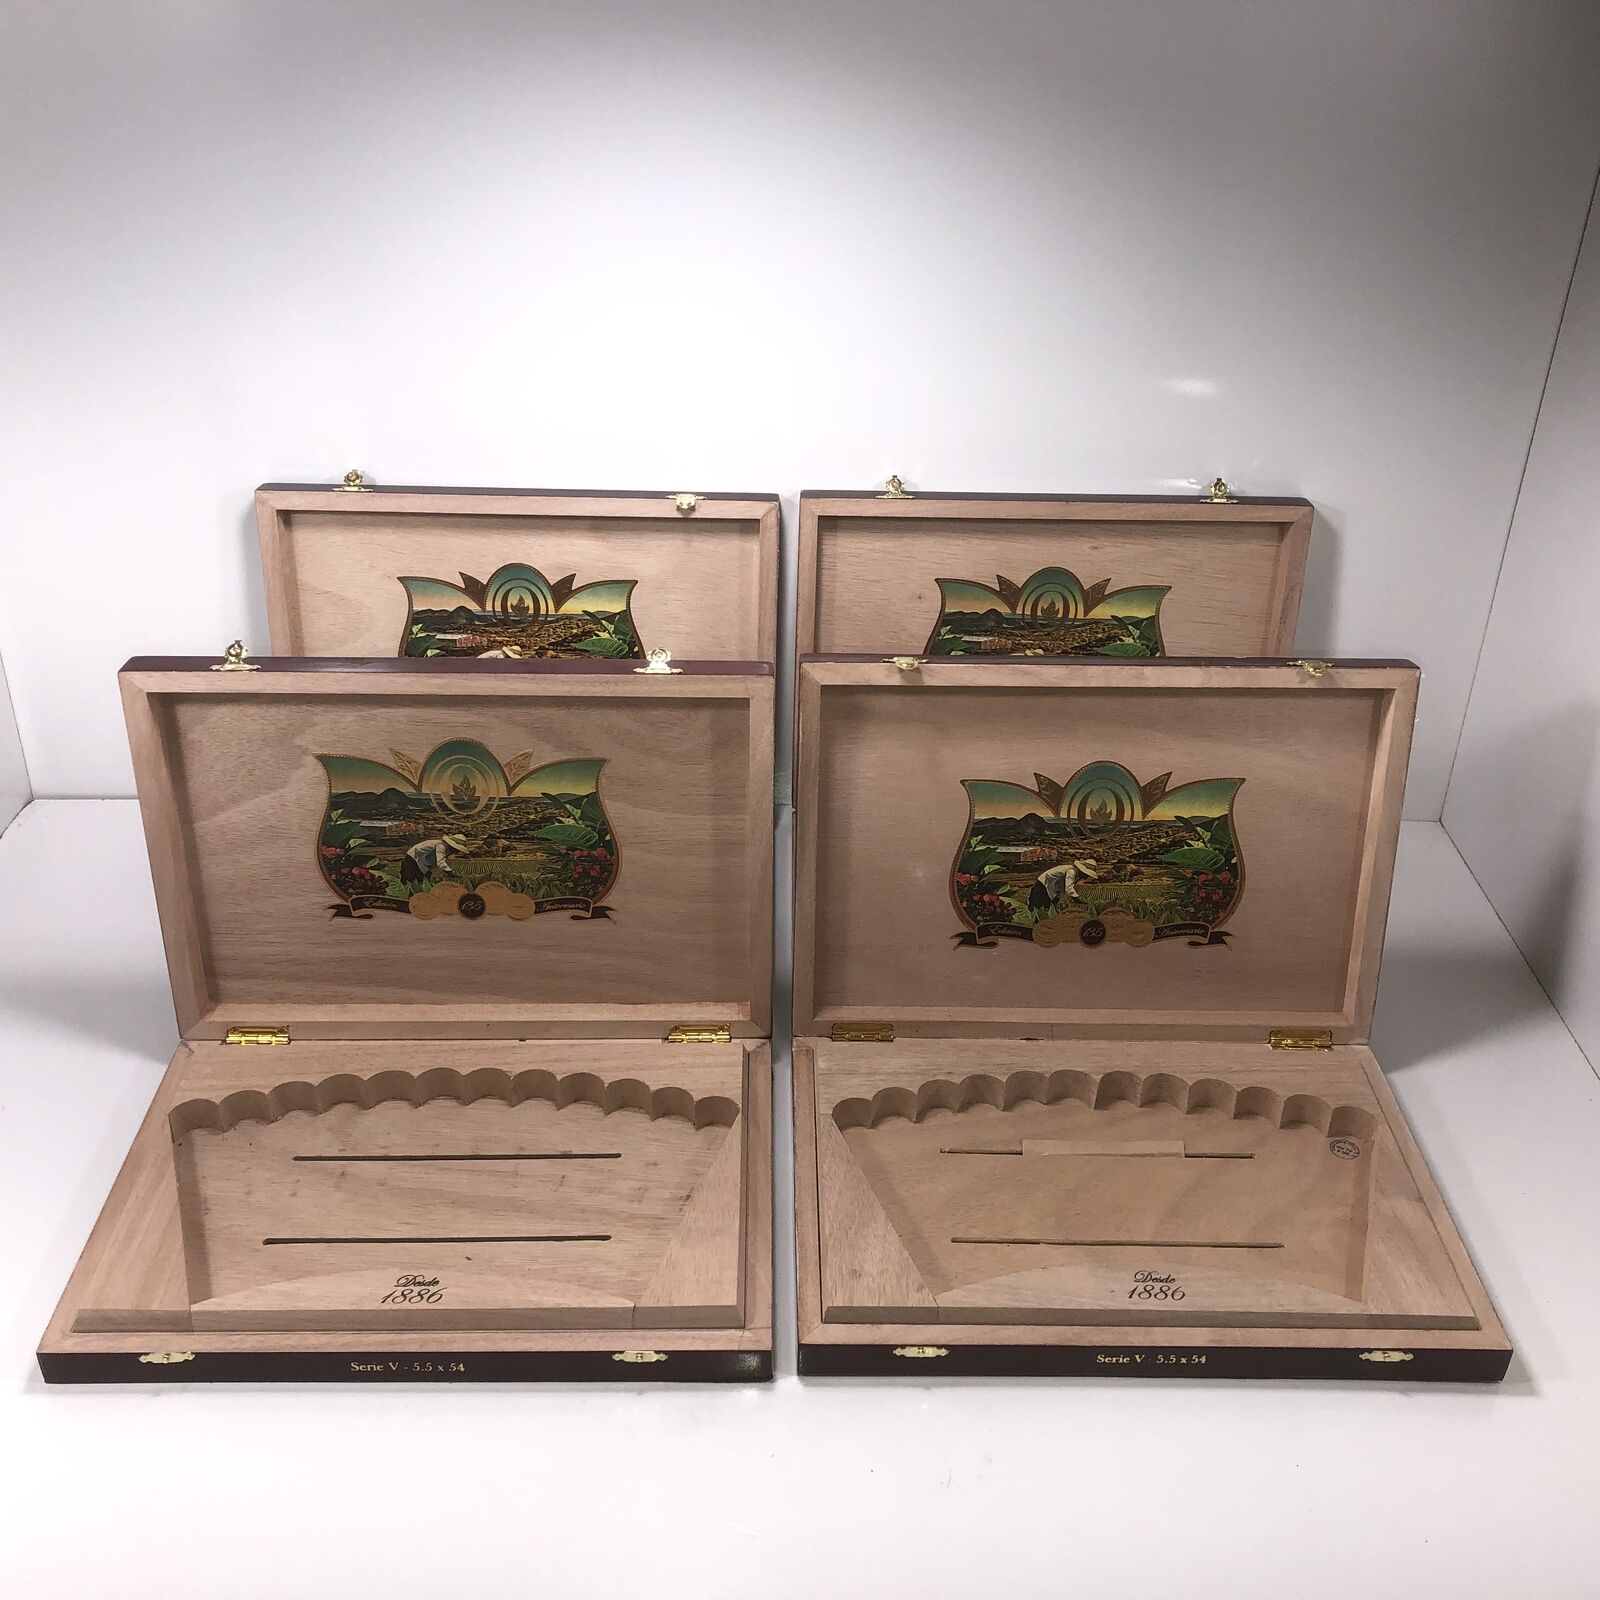 Lot of 4 Oliva 135th Anniversary Empty Wooden Cigar Boxes 13.25x9x1.75 #16